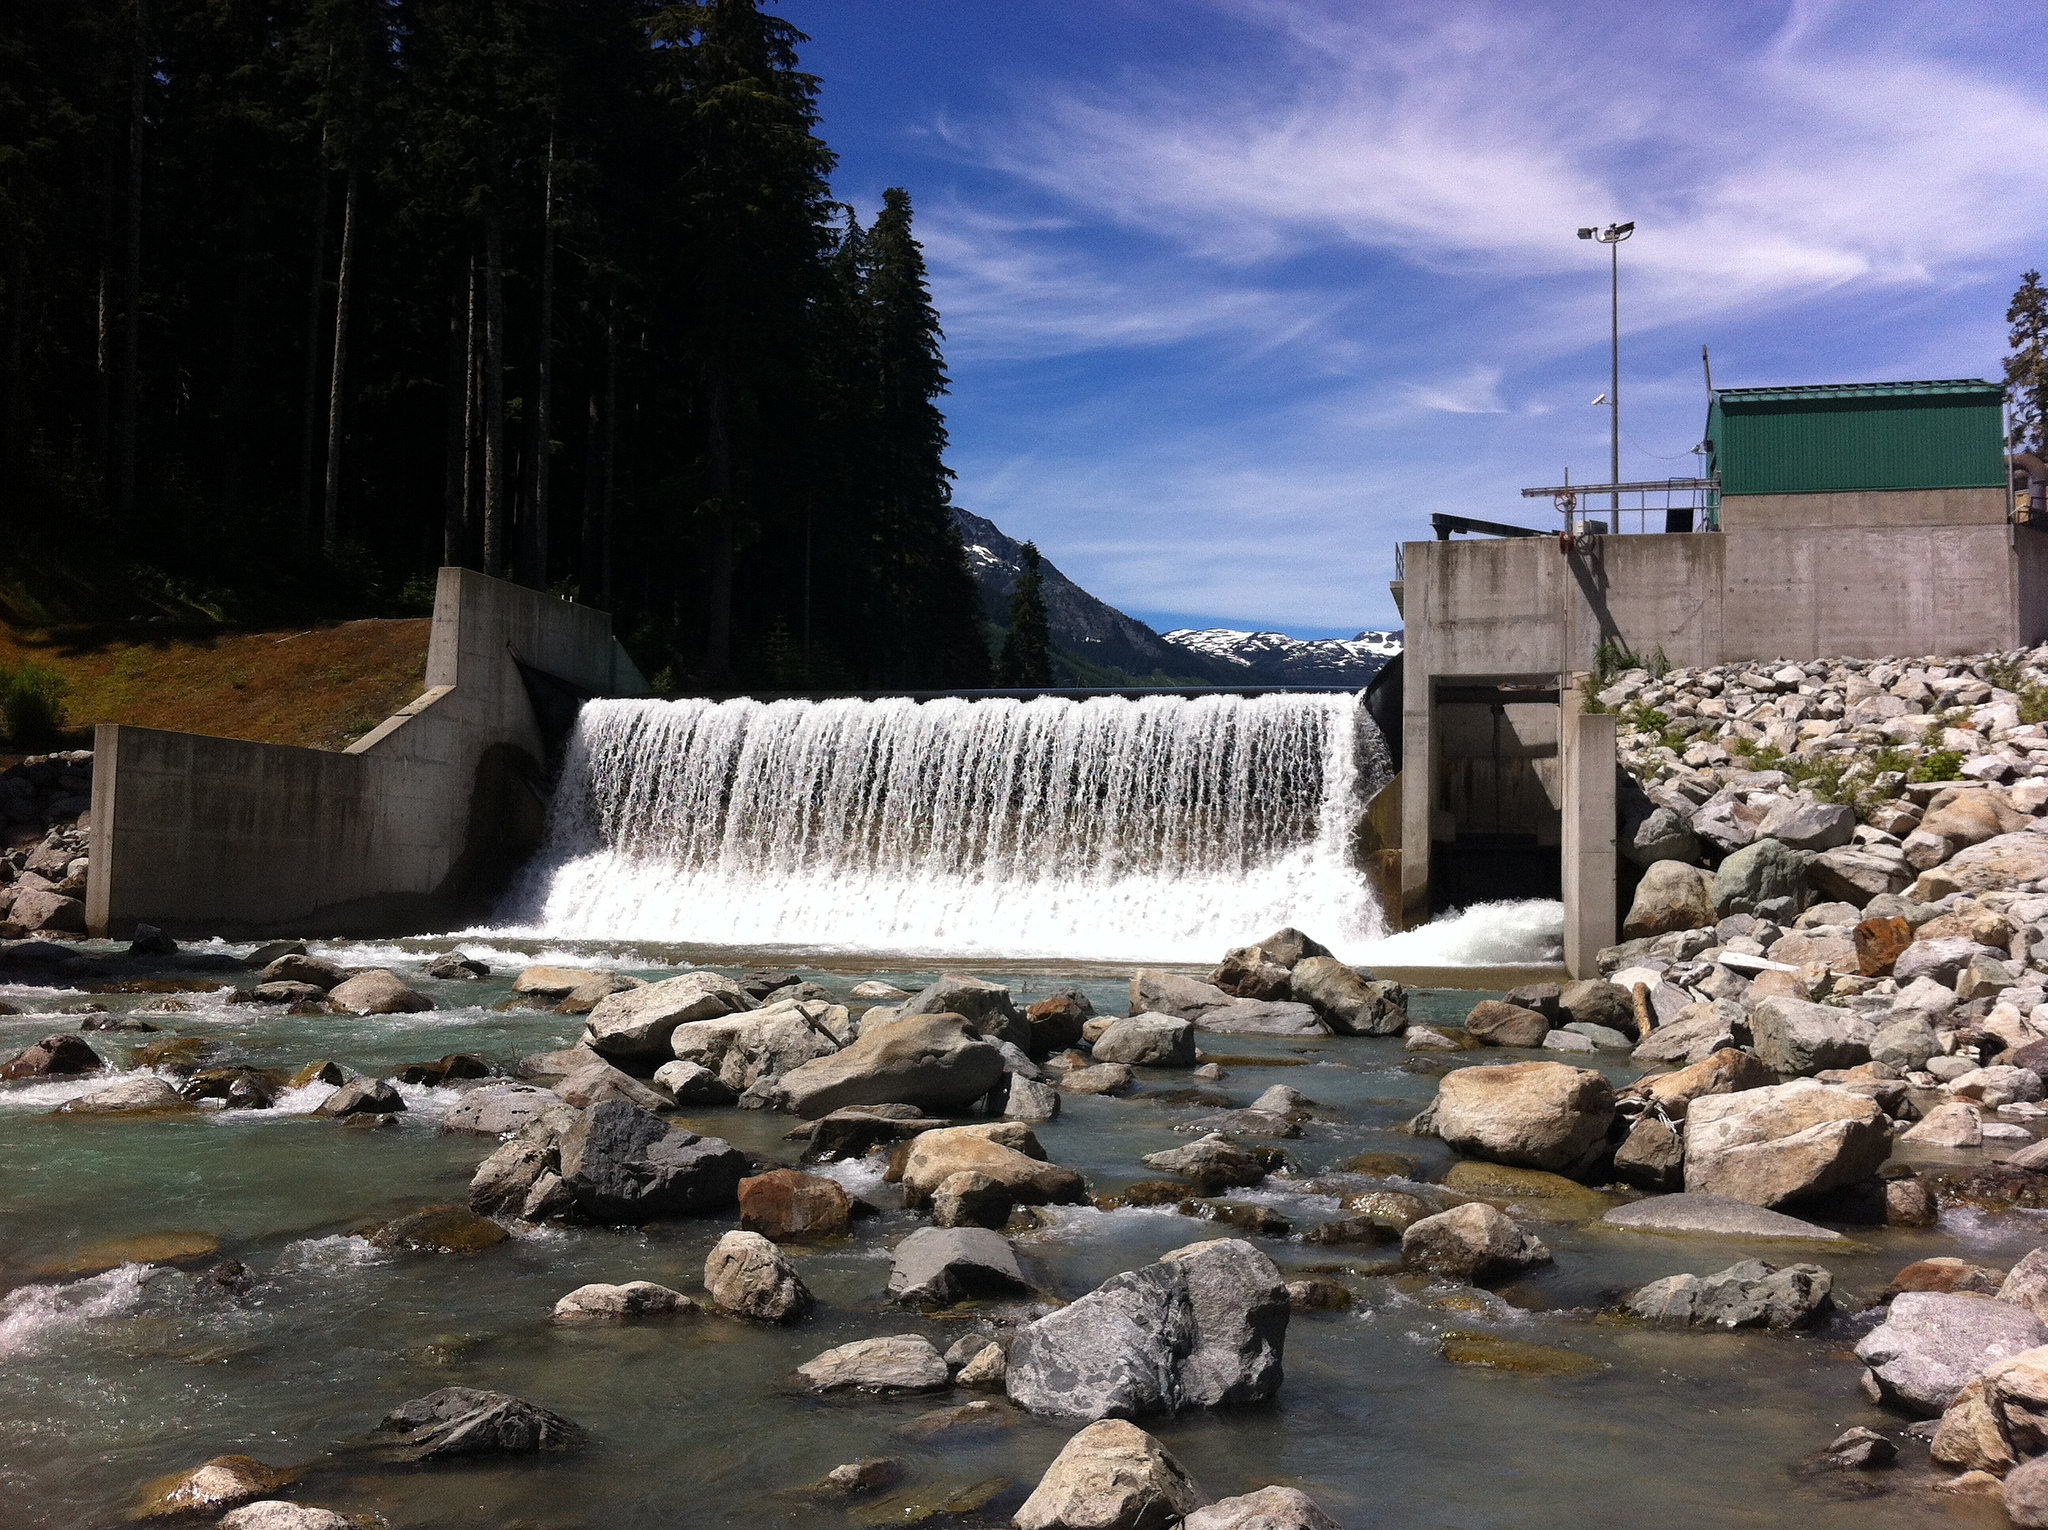 Small hydroelectric dams increase globally with little research ...